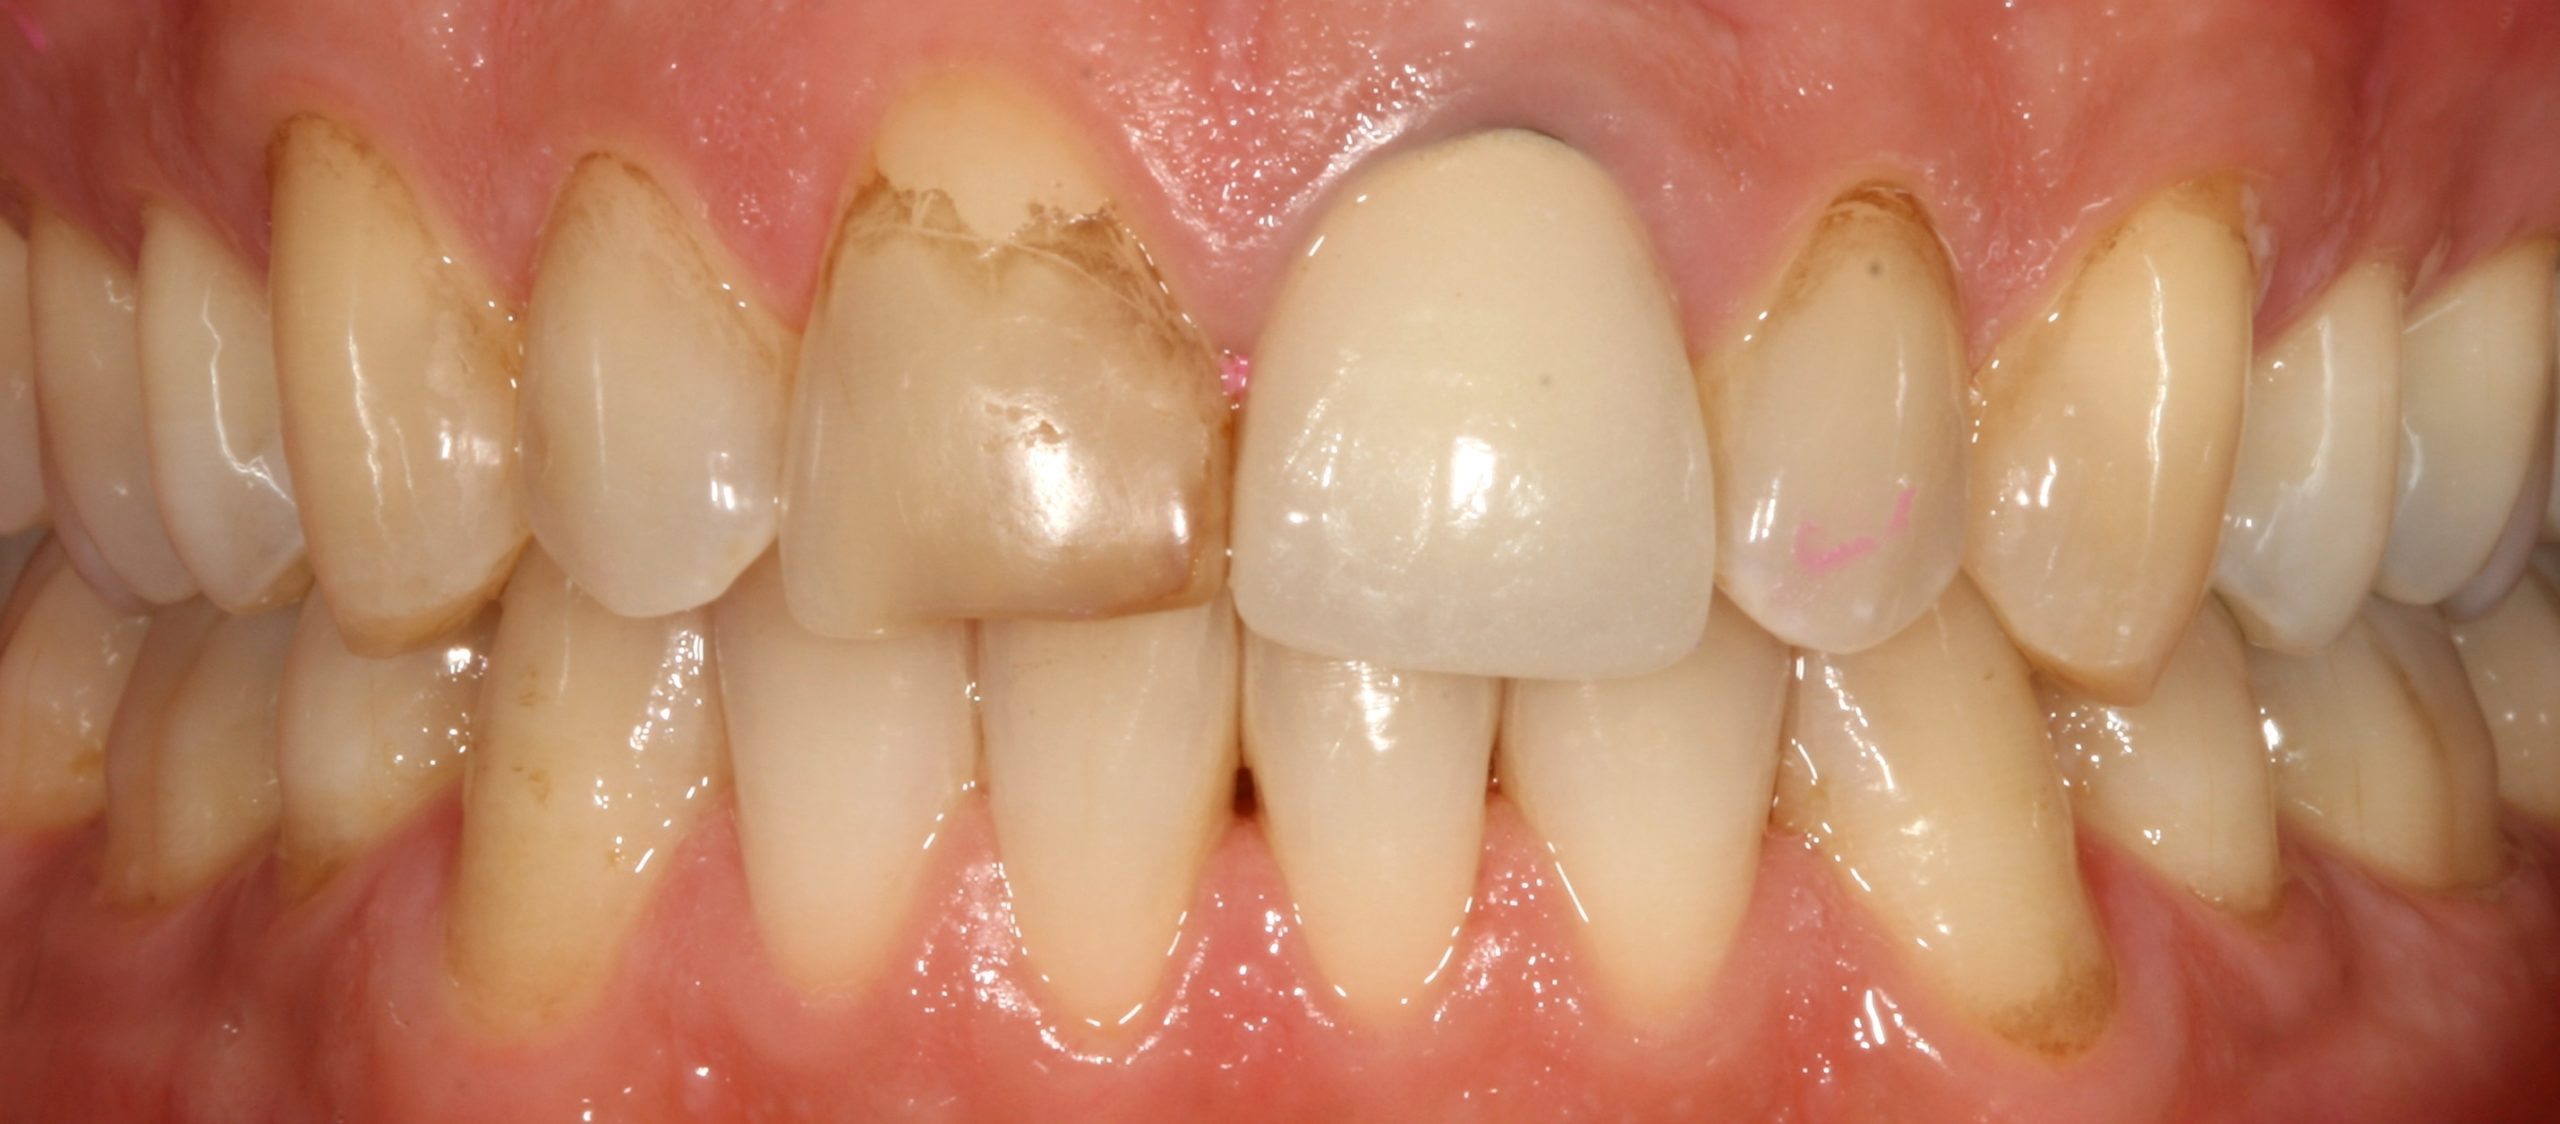 aesthetic case 3 (heavy staining) - before